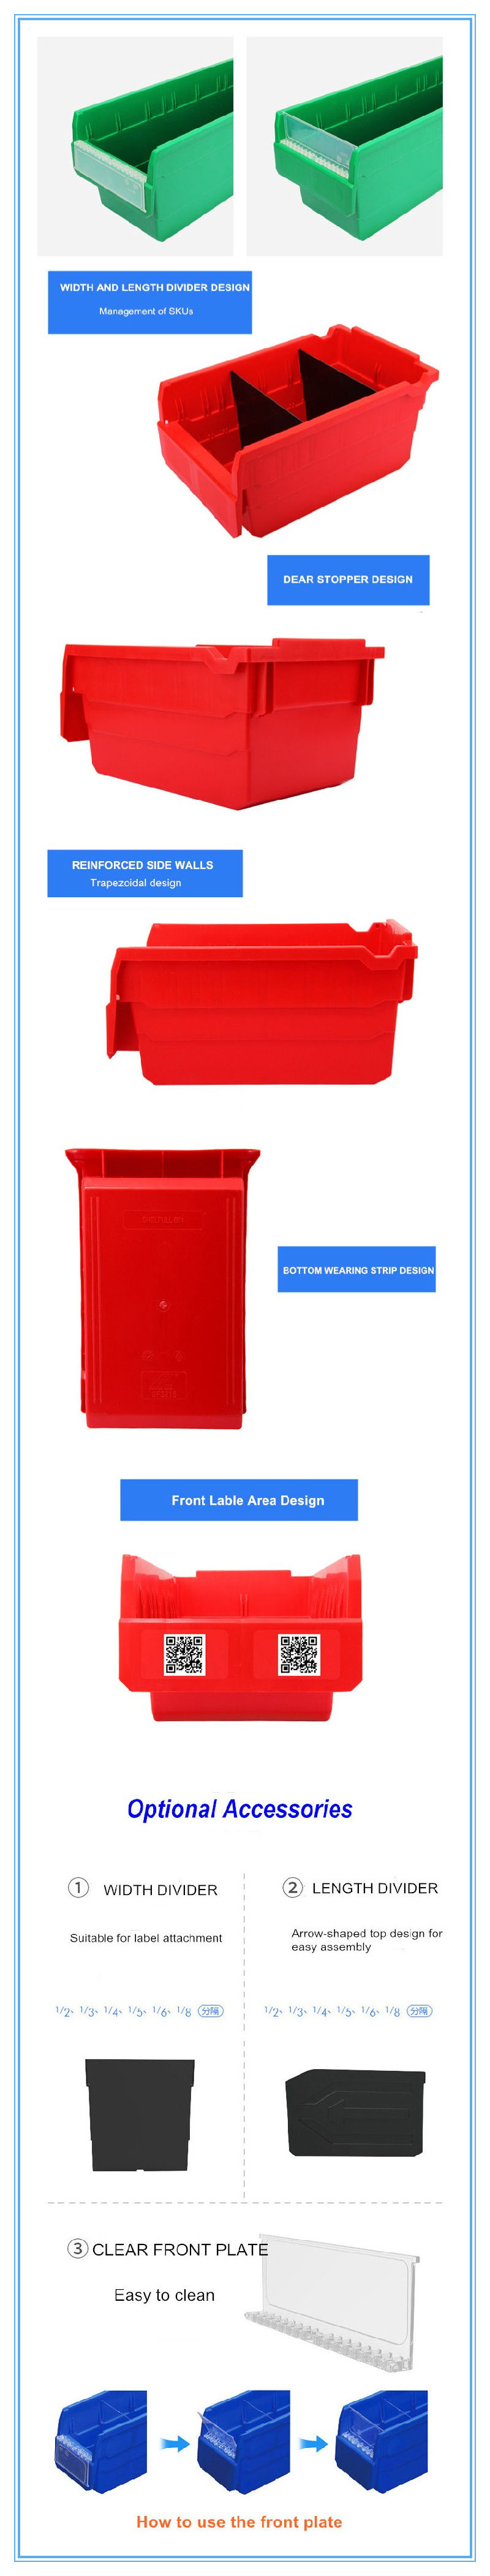 Industrial Warehouse Plastic Storage Spare Parts Bins for Tool Parts